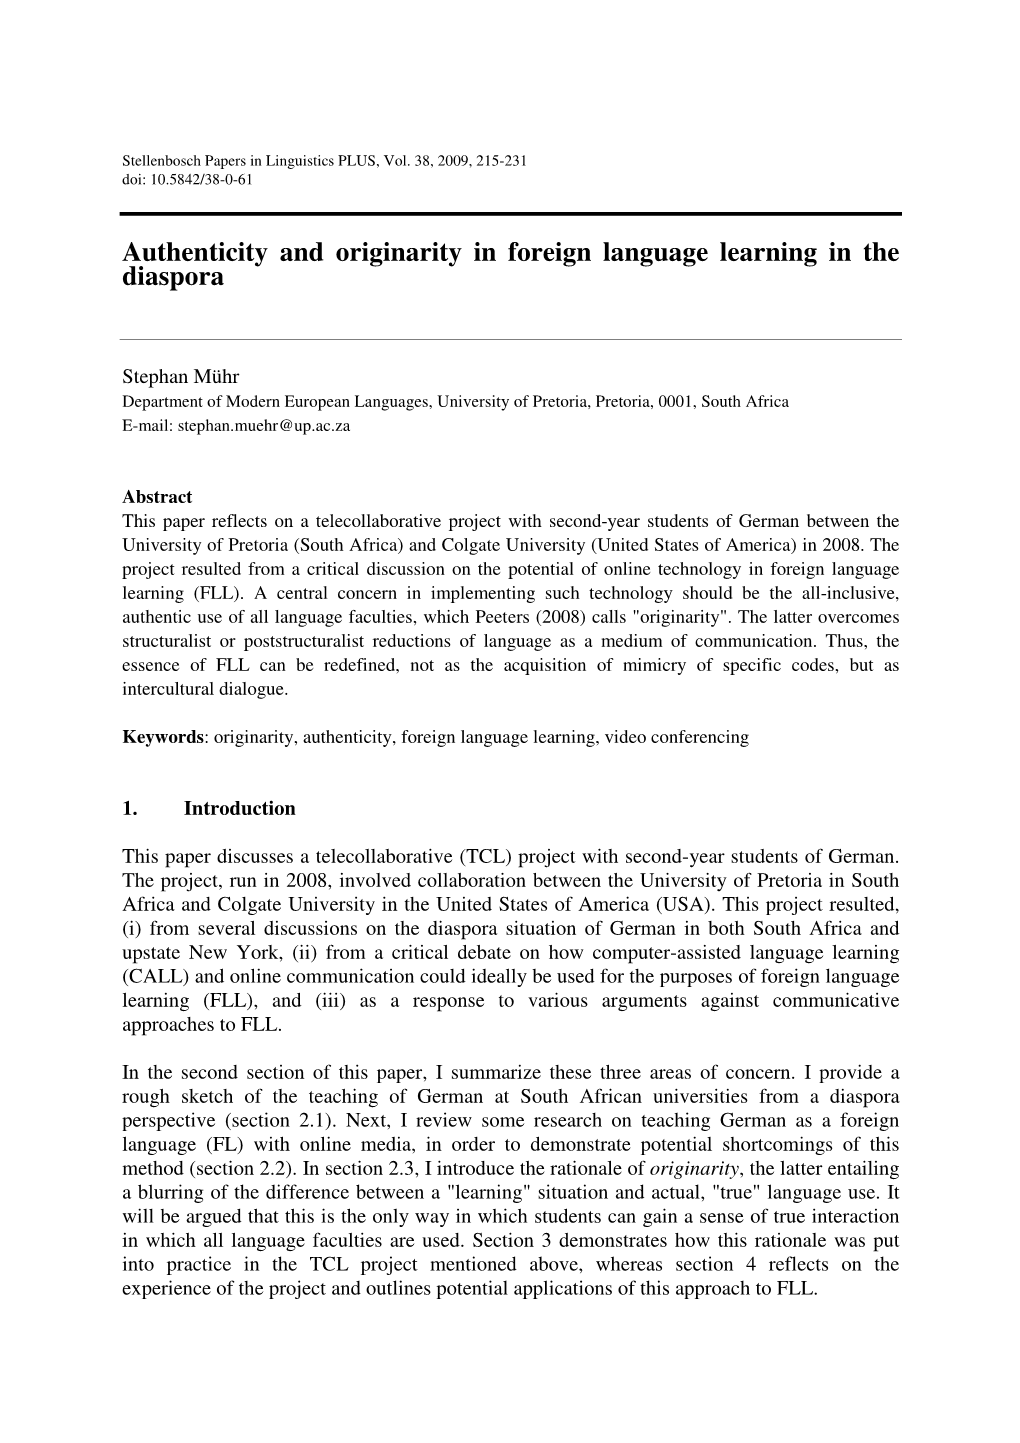 Authenticity and Originarity in Foreign Language Learning in the Diaspora